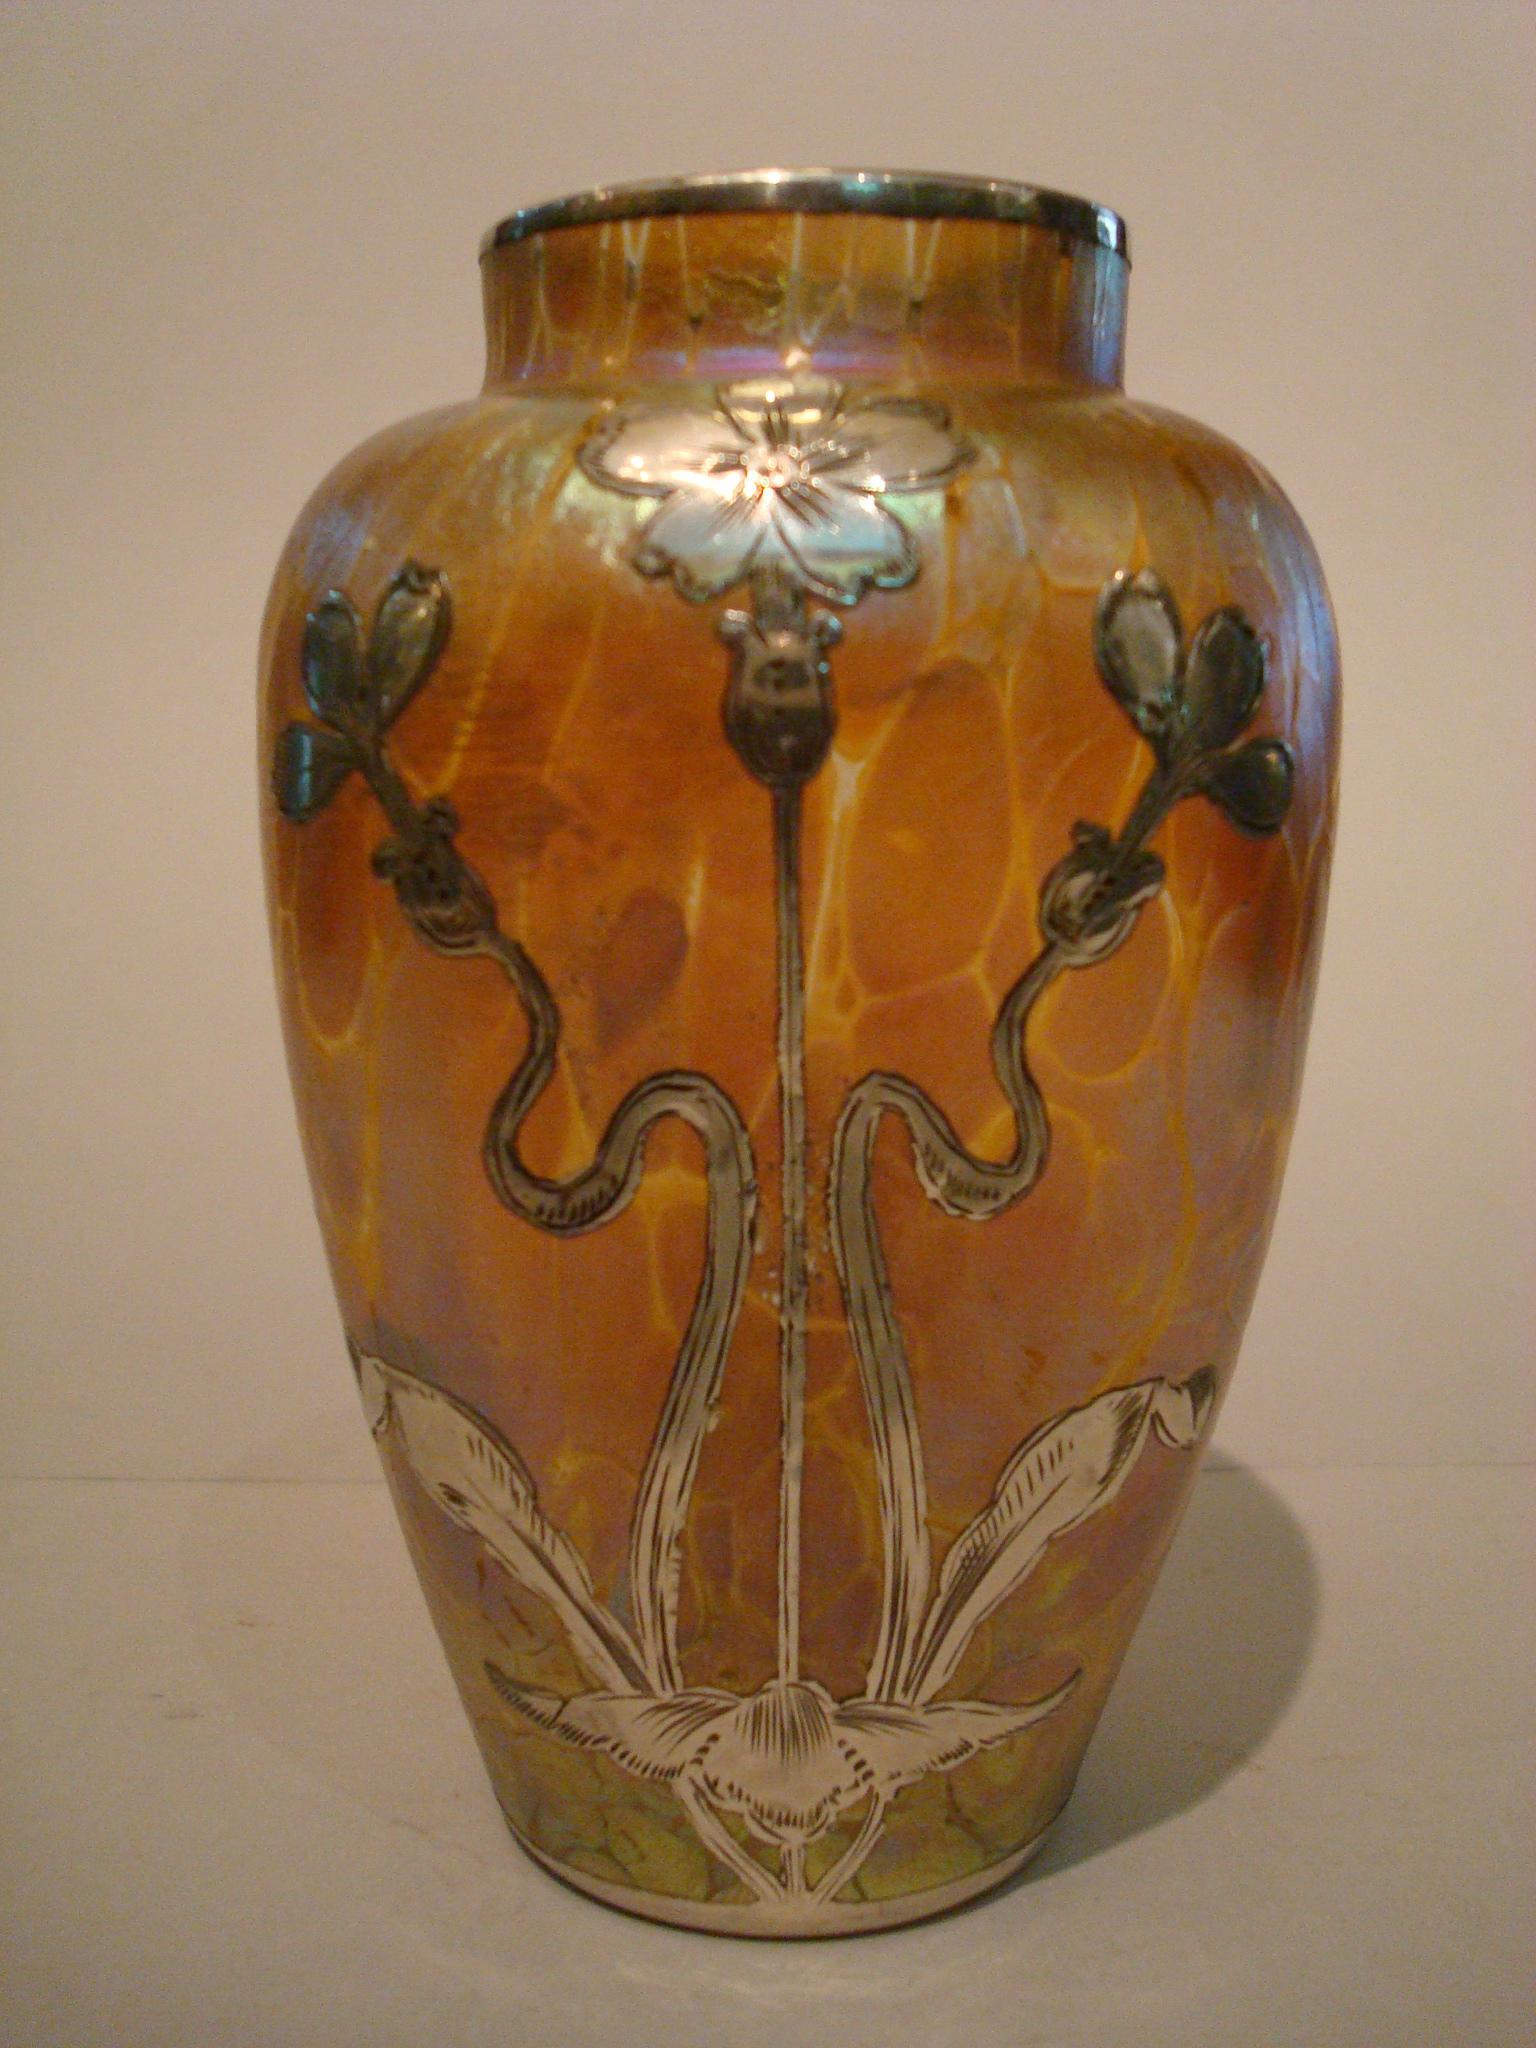 Art Nouveau Loetz Iridescent Glass Vase with Silver Overlay In Good Condition For Sale In Buenos Aires, Olivos